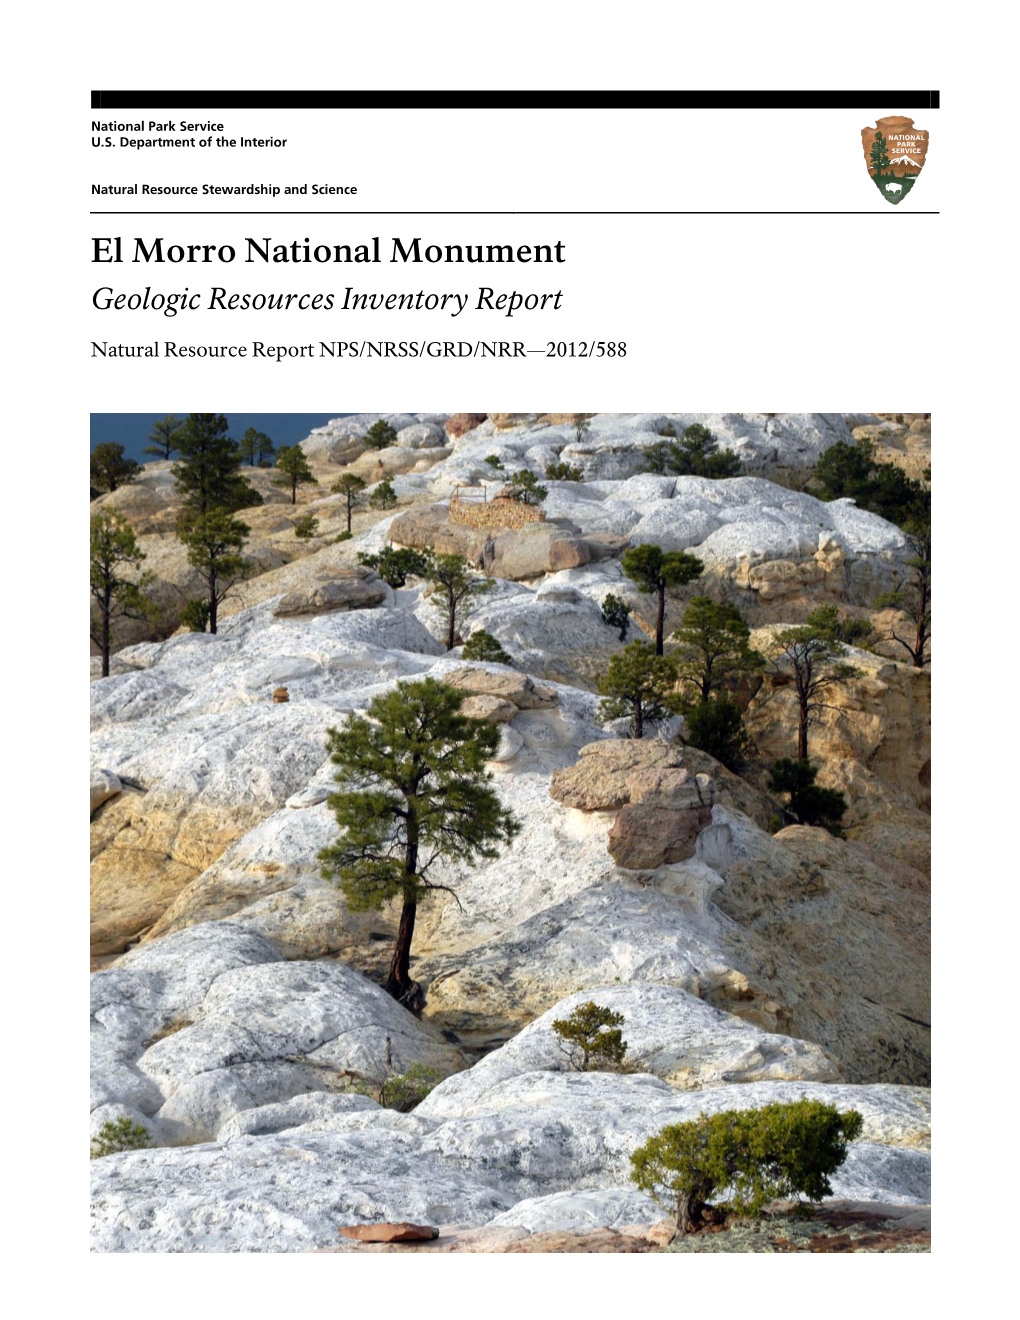 El Morro National Monument Geologic Resources Inventory Report